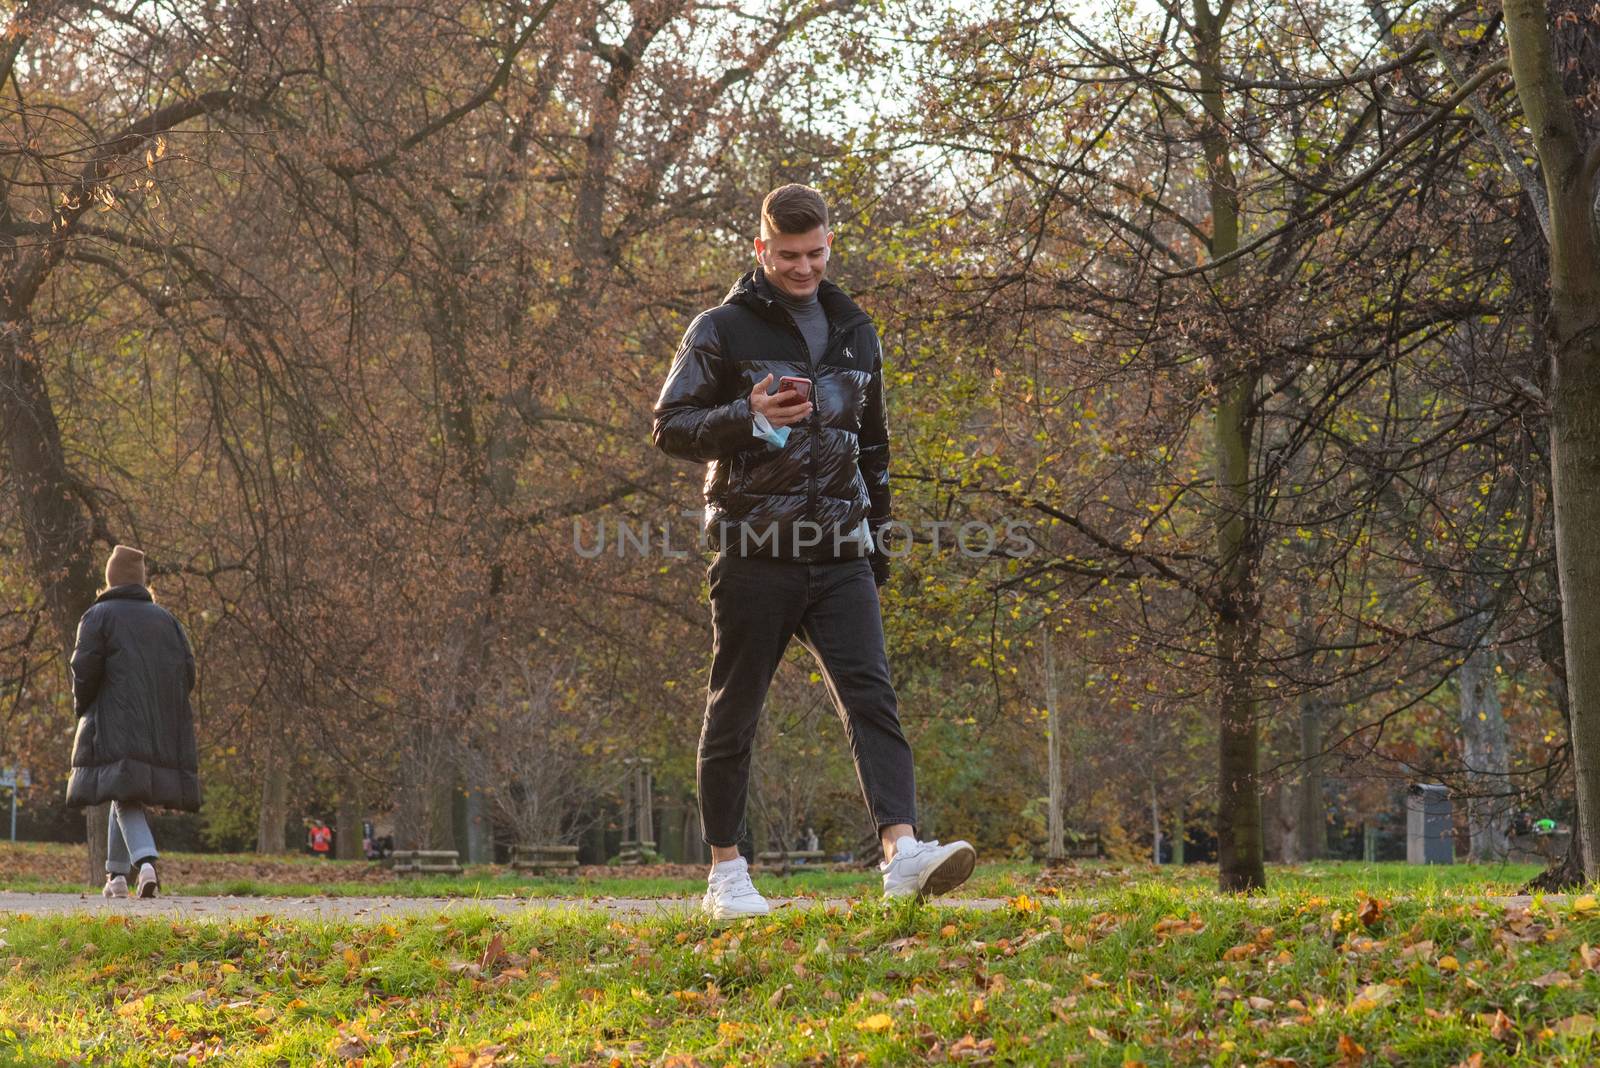 1/14/2020. Park Stromovka. Prague czech Republic. A man is watching or speaking with his phone while walking in the park on a Sunday winter day.